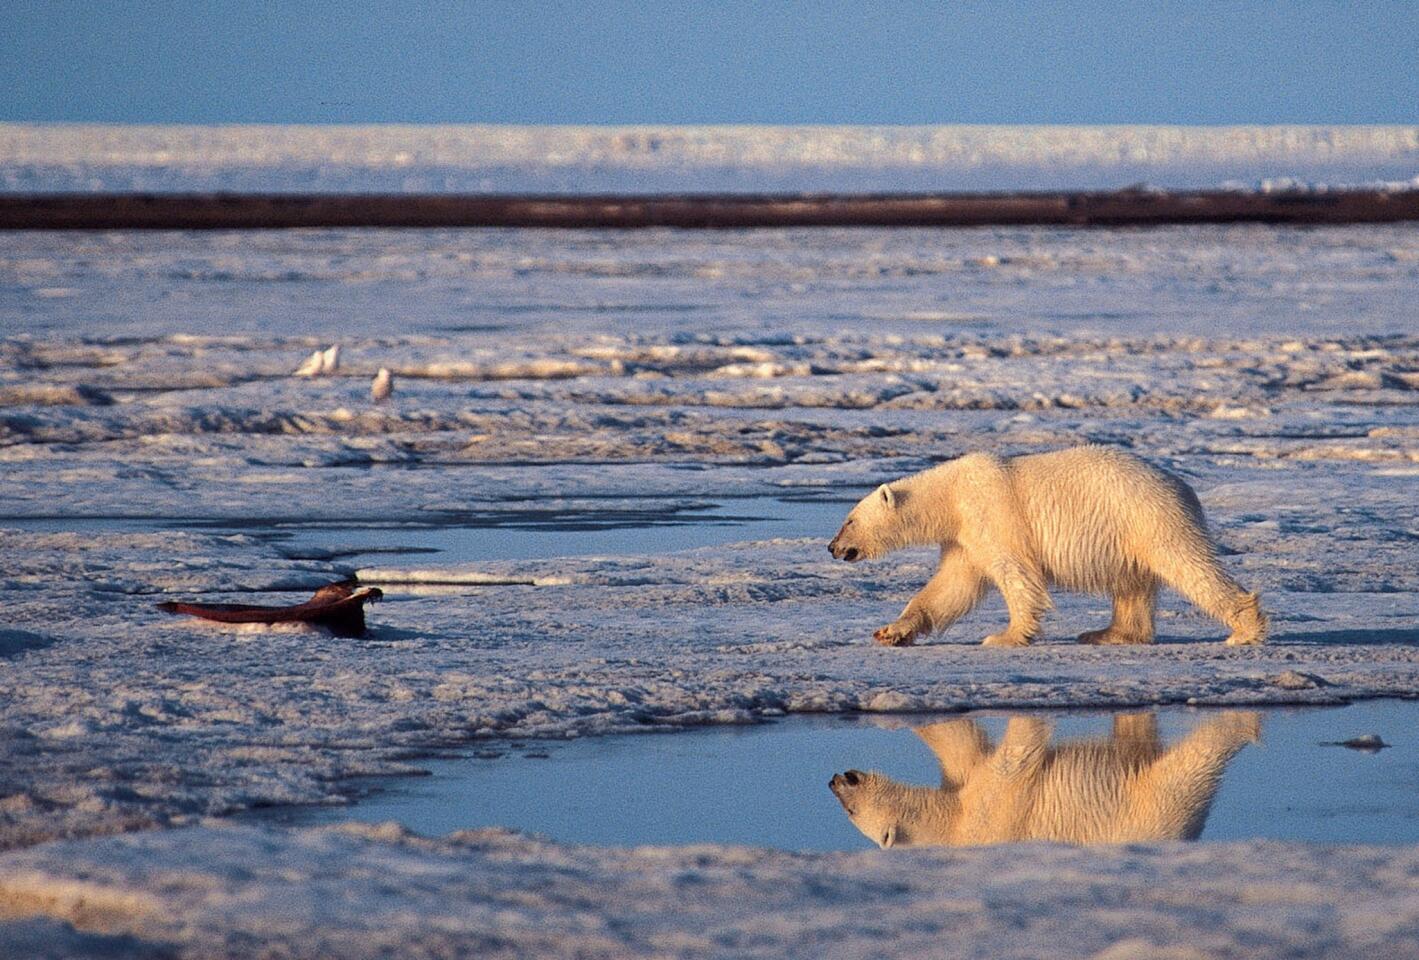 The final decision on designating more of the Arctic National Wildlife Refuge as protected wilderness rests with Congress, but the Interior Department plans to immediately begin managing the area under that level of protection.